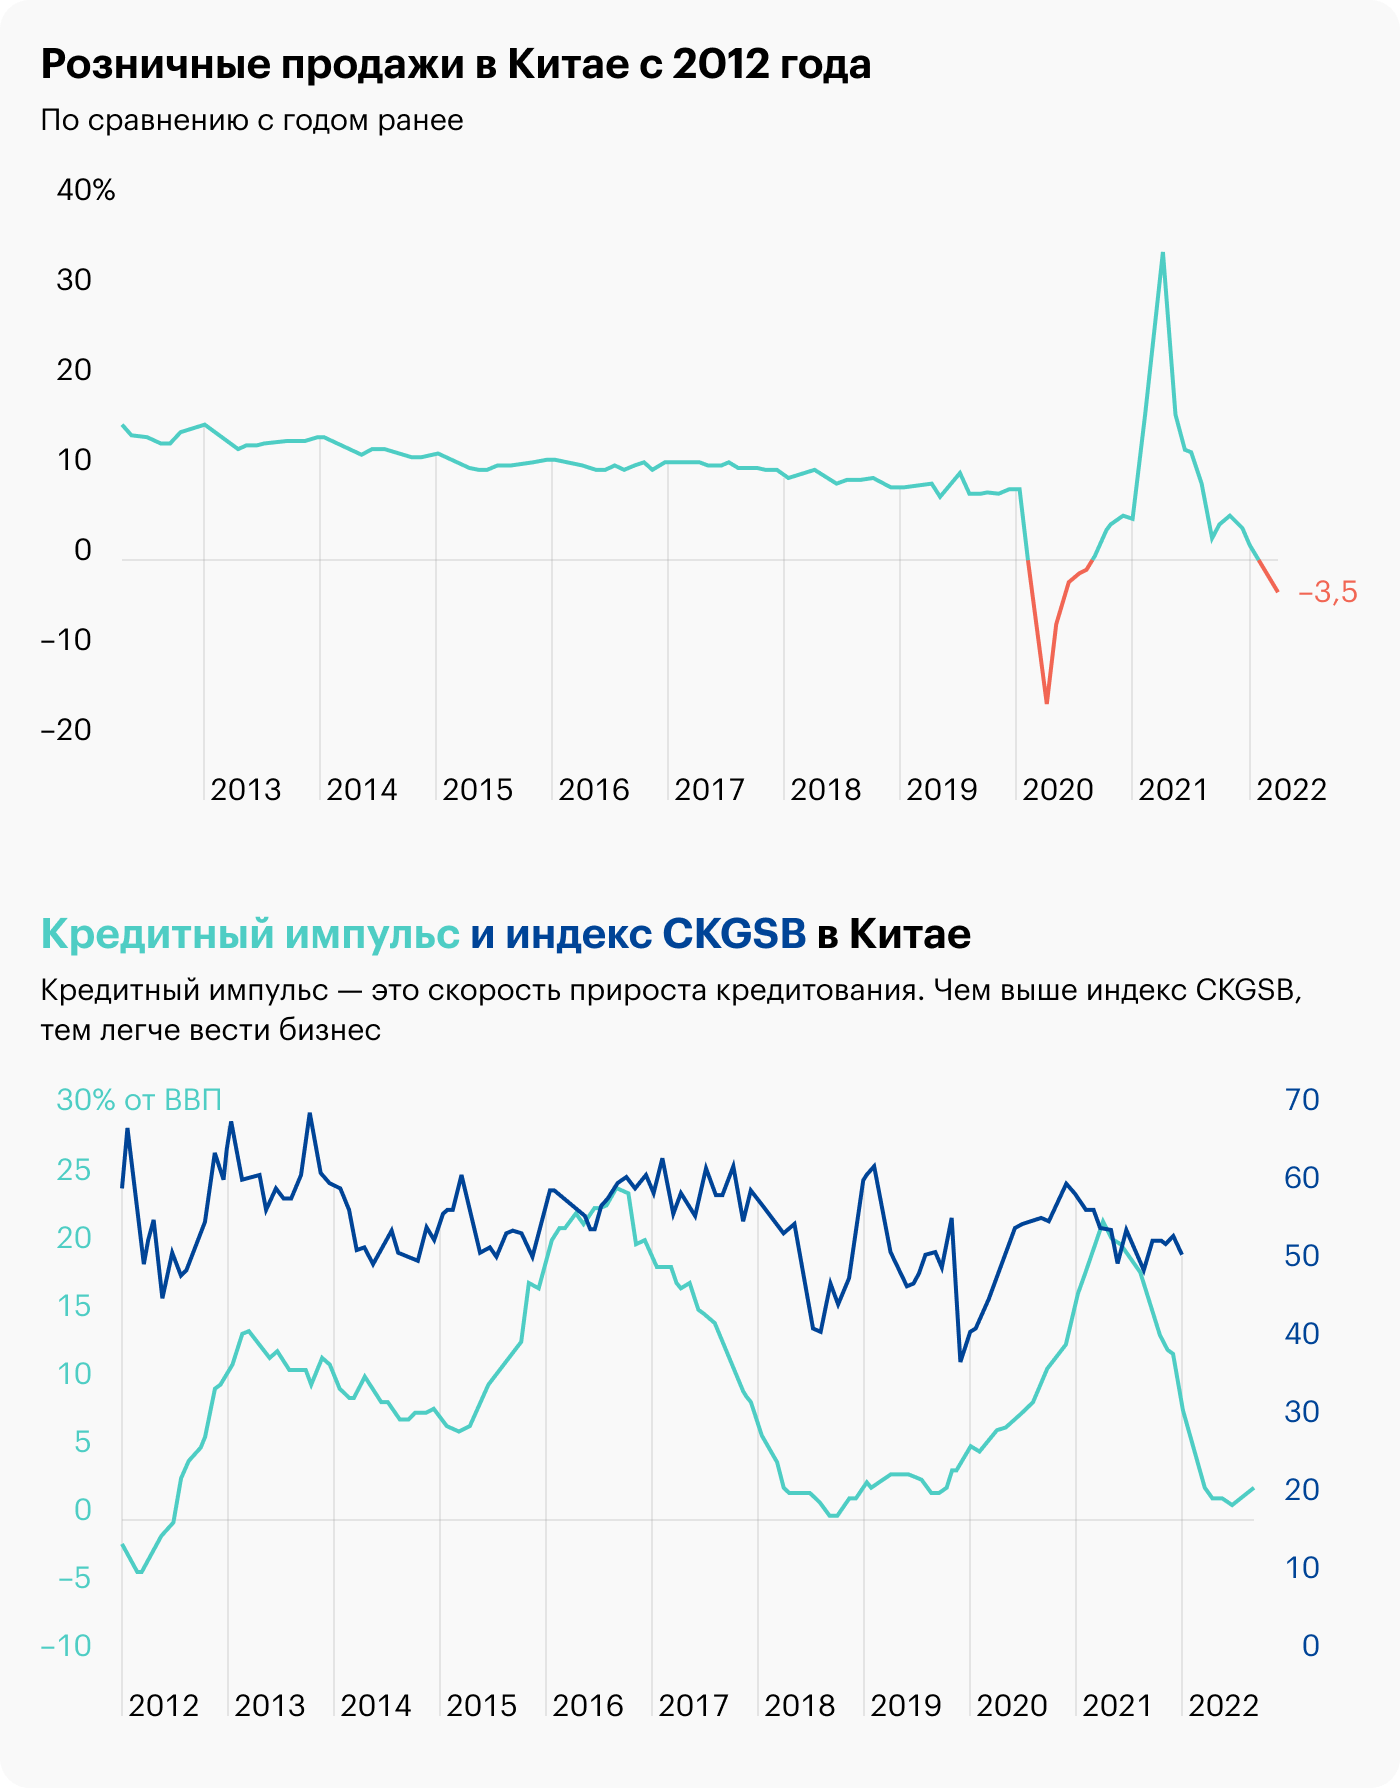 Источник: Daily Shot — Retail sales contracted, The recent decline in the credit impulse